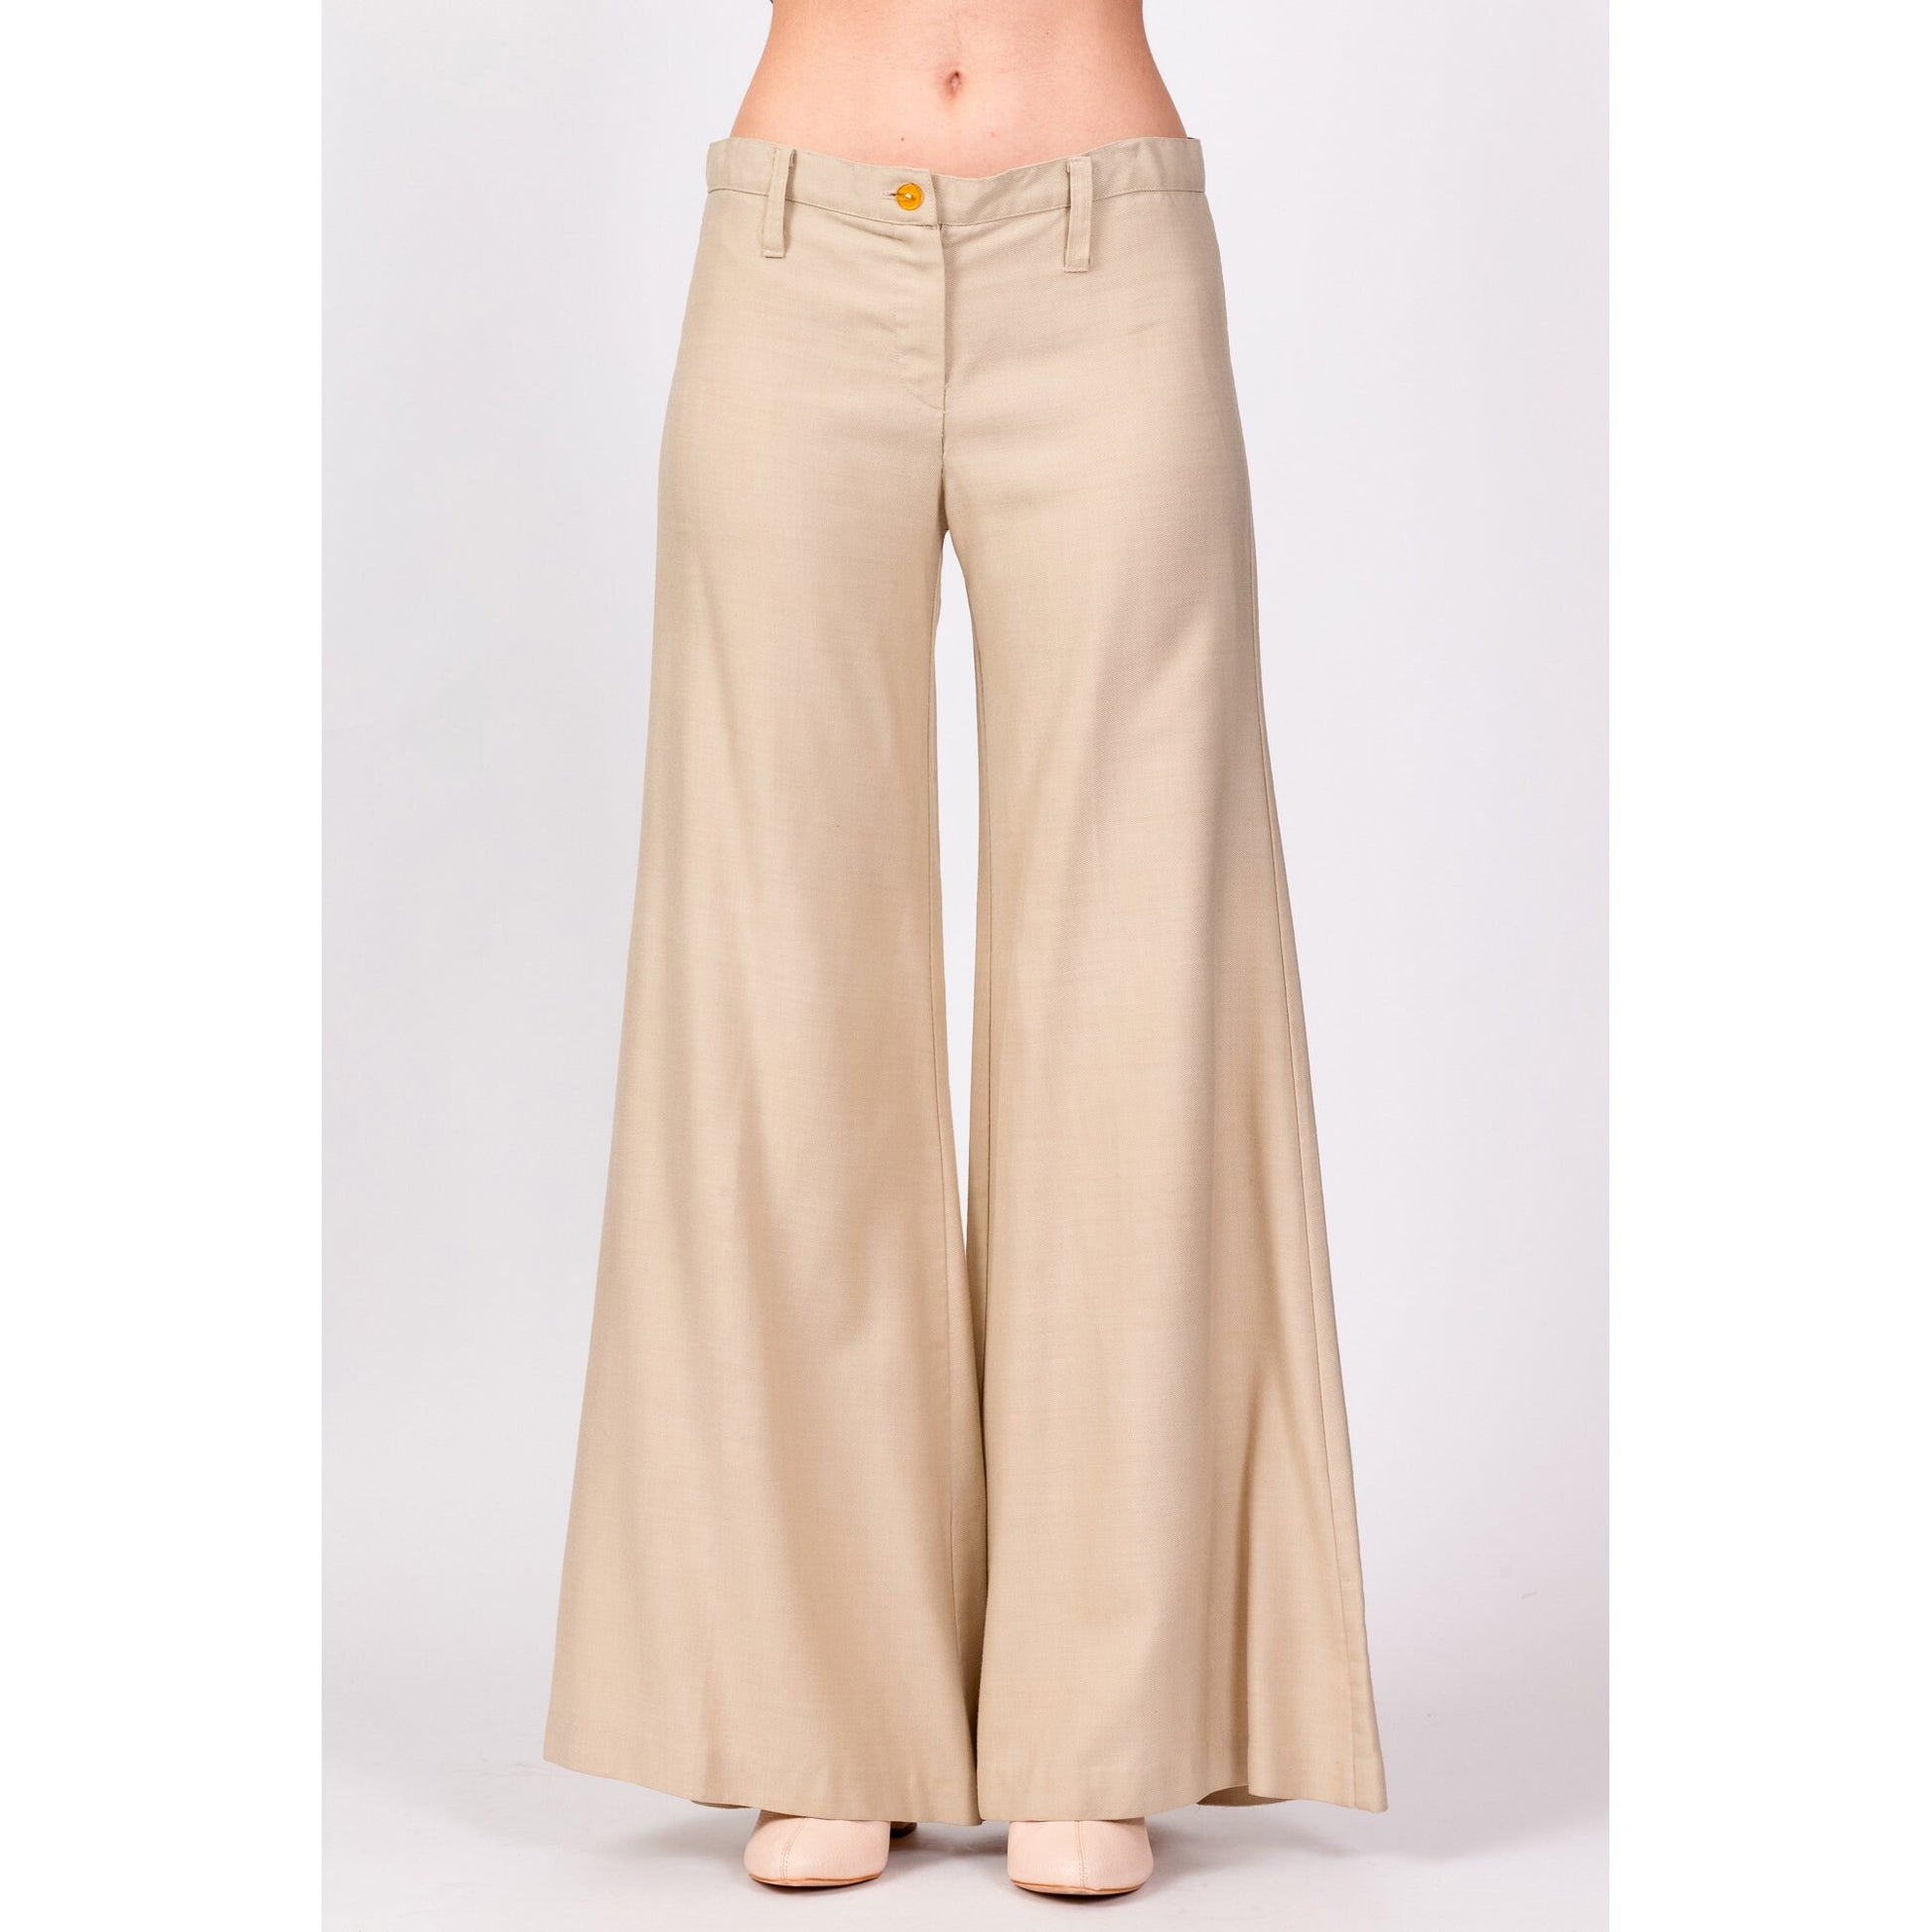 70s Khaki Low Rise Bell Bottoms - Extra Small 